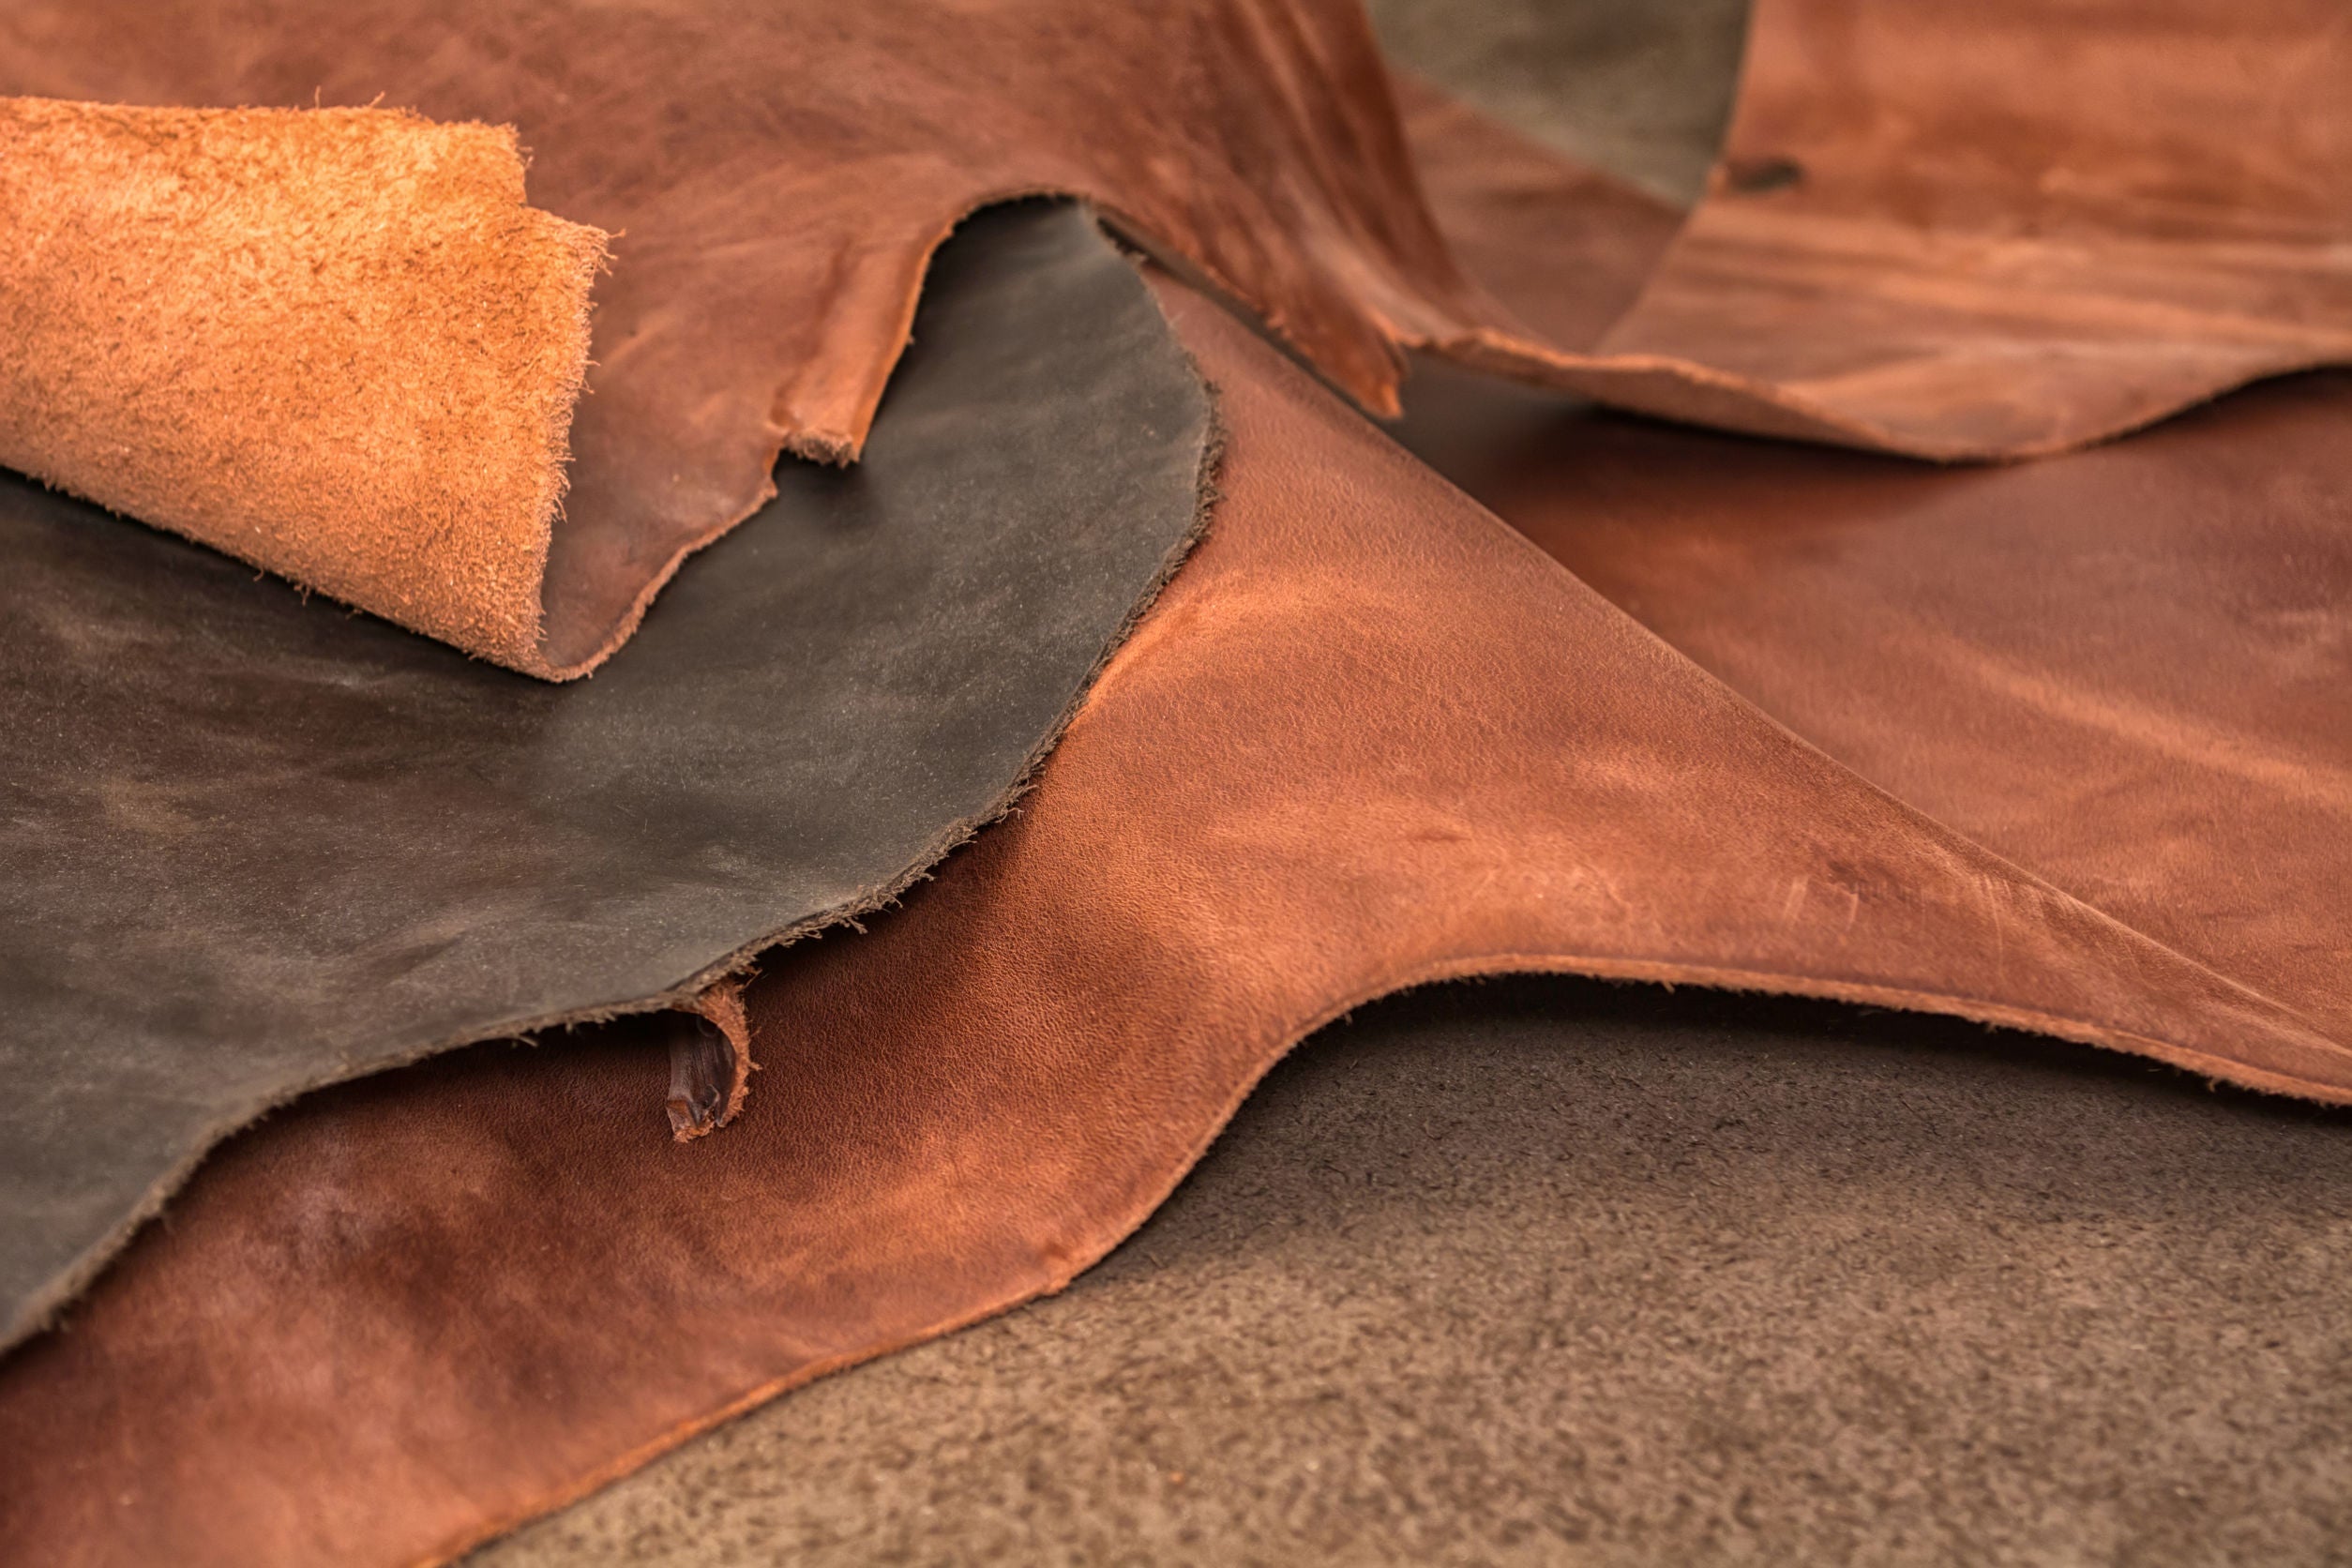 Different Types of Leather Fabric: Faux, Top Grain, & More